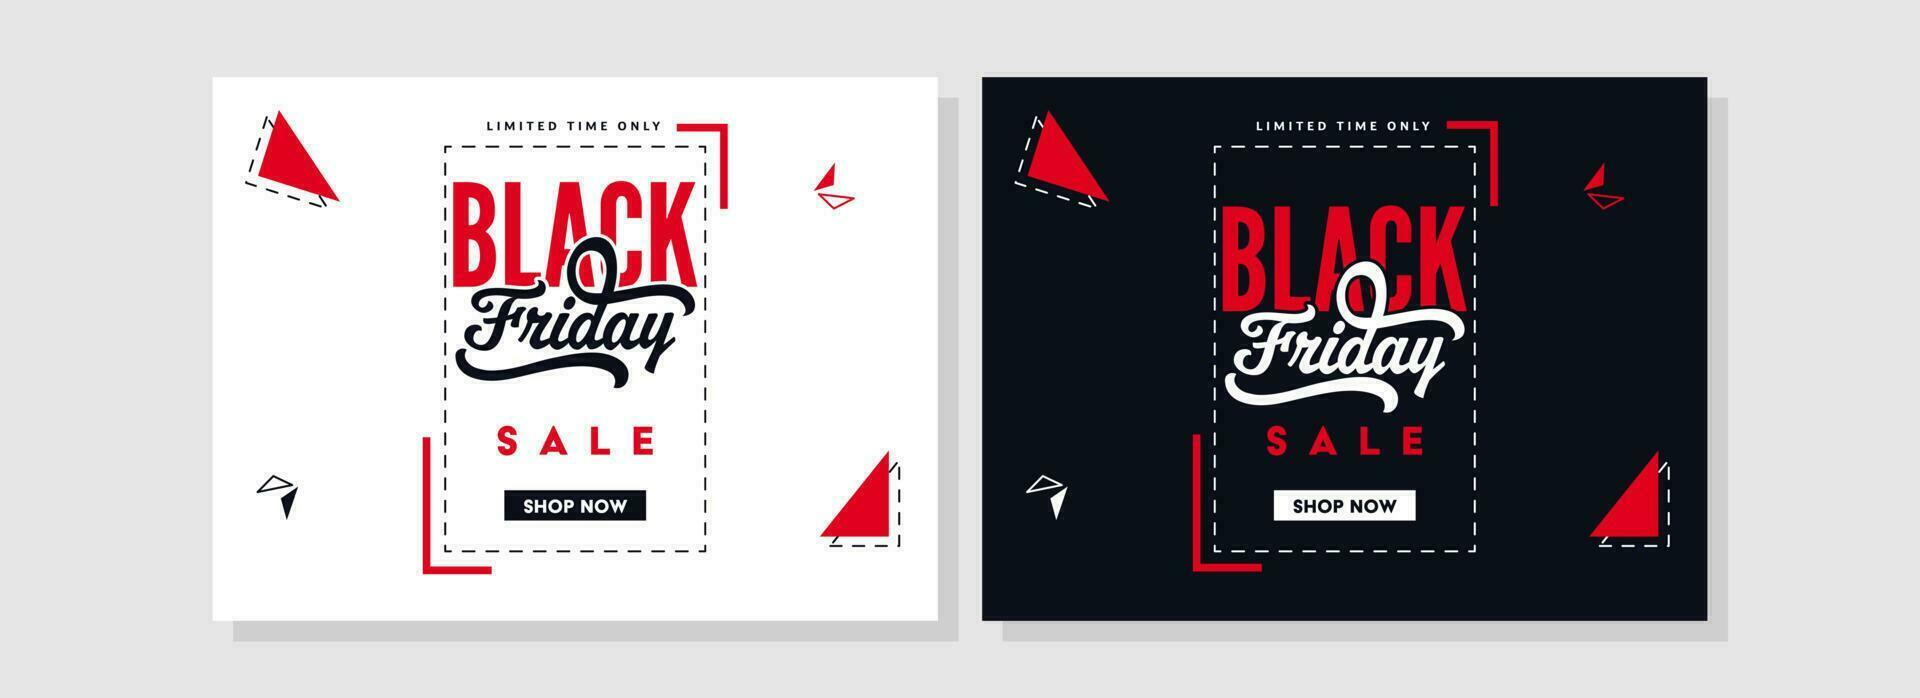 Black Friday Sale Poster Design Decorated With Triangle Shapes In Two Color Options. vector